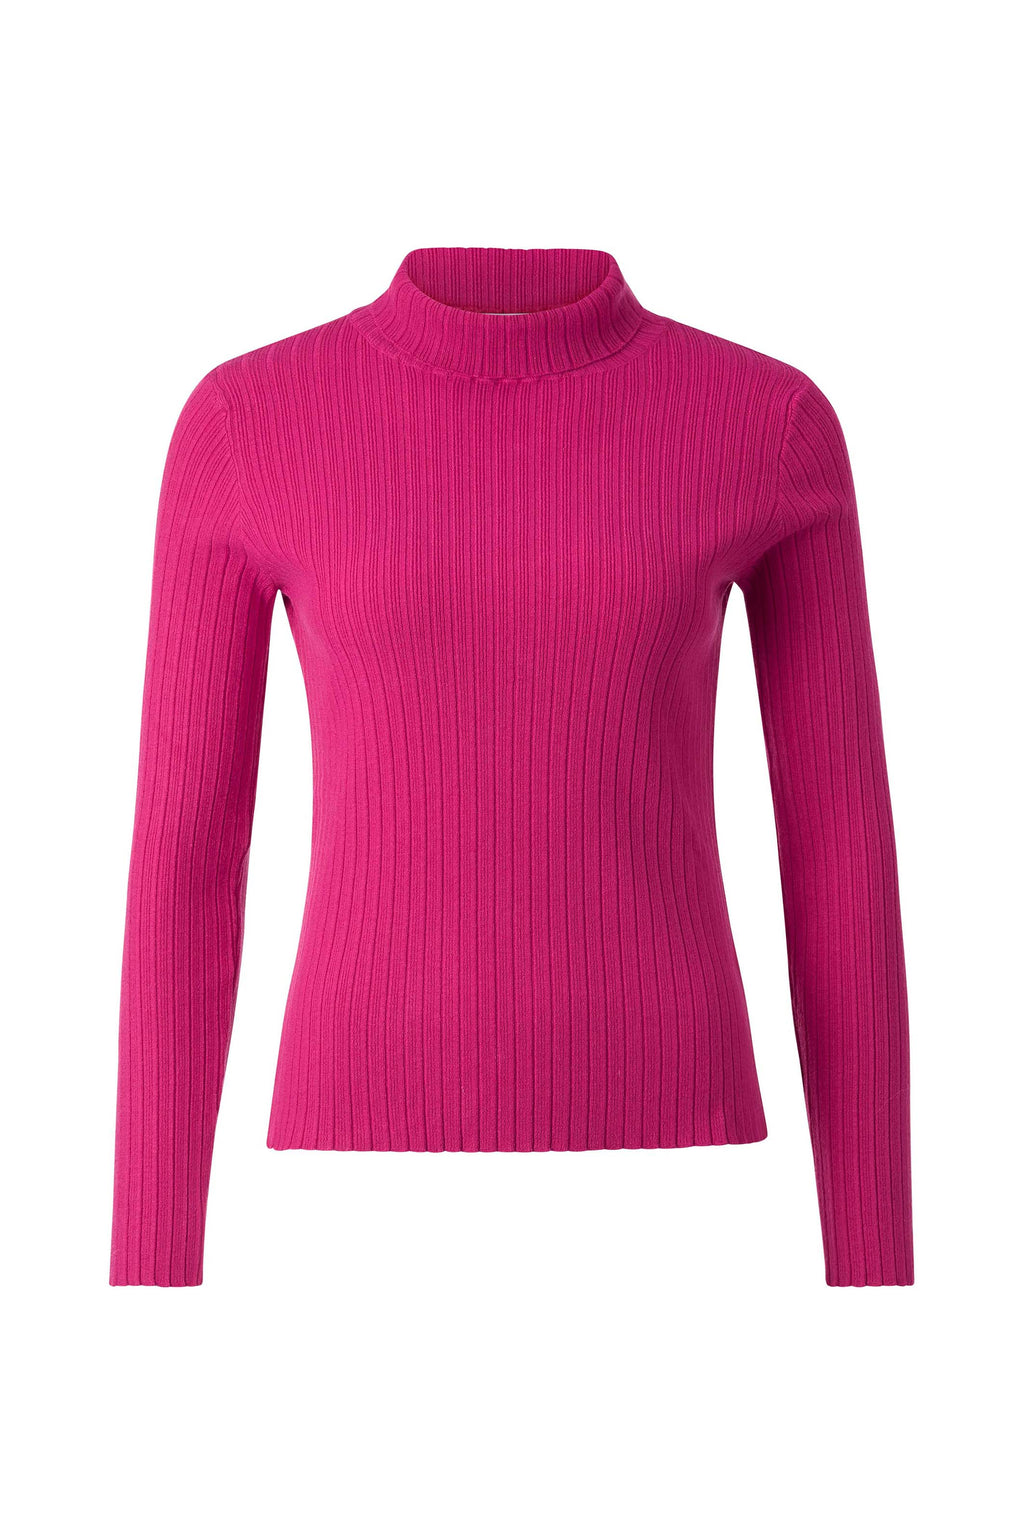 RICH&ROYAL TURTLE NECK PULLOVER PINK 2310-163